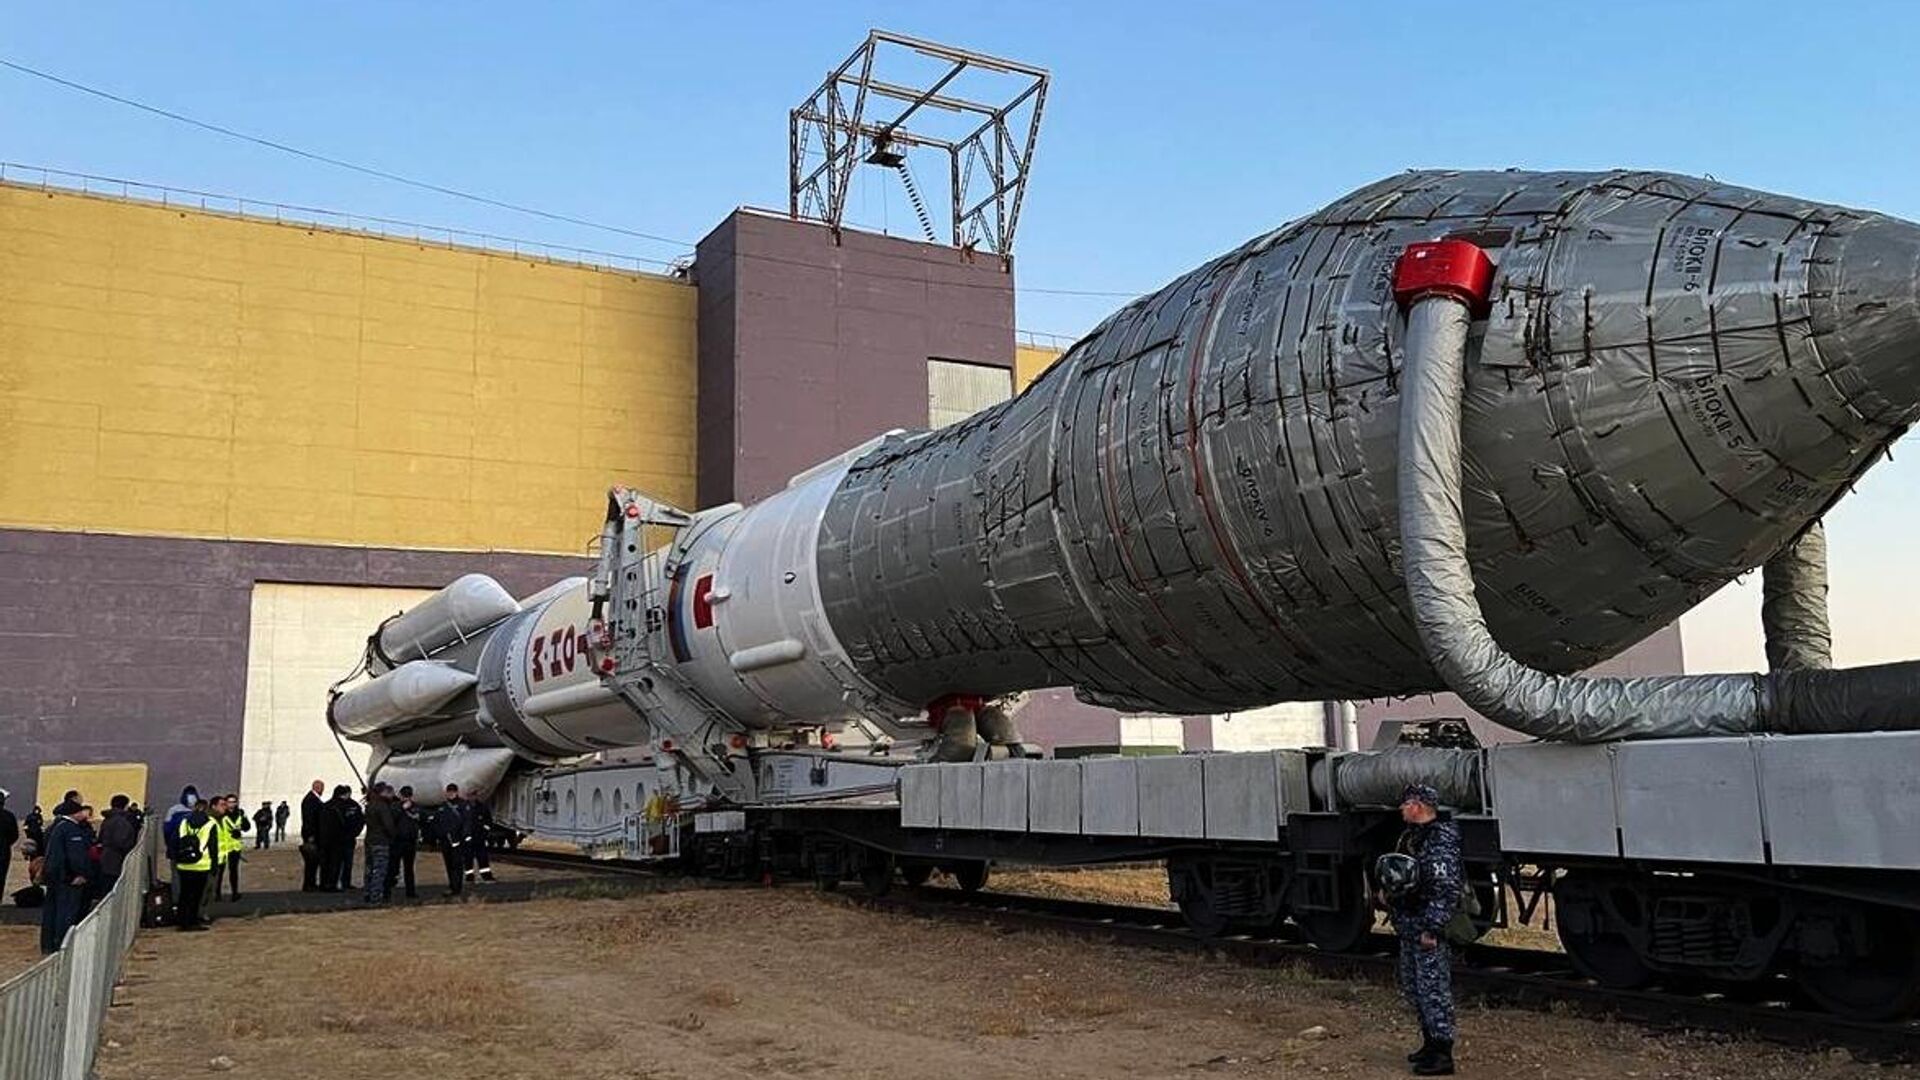 In this handout photo released by the Russian Space Agency Roscosmos, the Proton-M carrier rocket carrying the communications satellite AngoSat-2, a joint space project of Russia and Angola, is transported to a launchpad at the Baikonur Cosmodrome, Kazakhstan. Editorial use only, no archive, no commercial use. Date taken: 09.10.2022 - Sputnik Africa, 1920, 27.04.2023